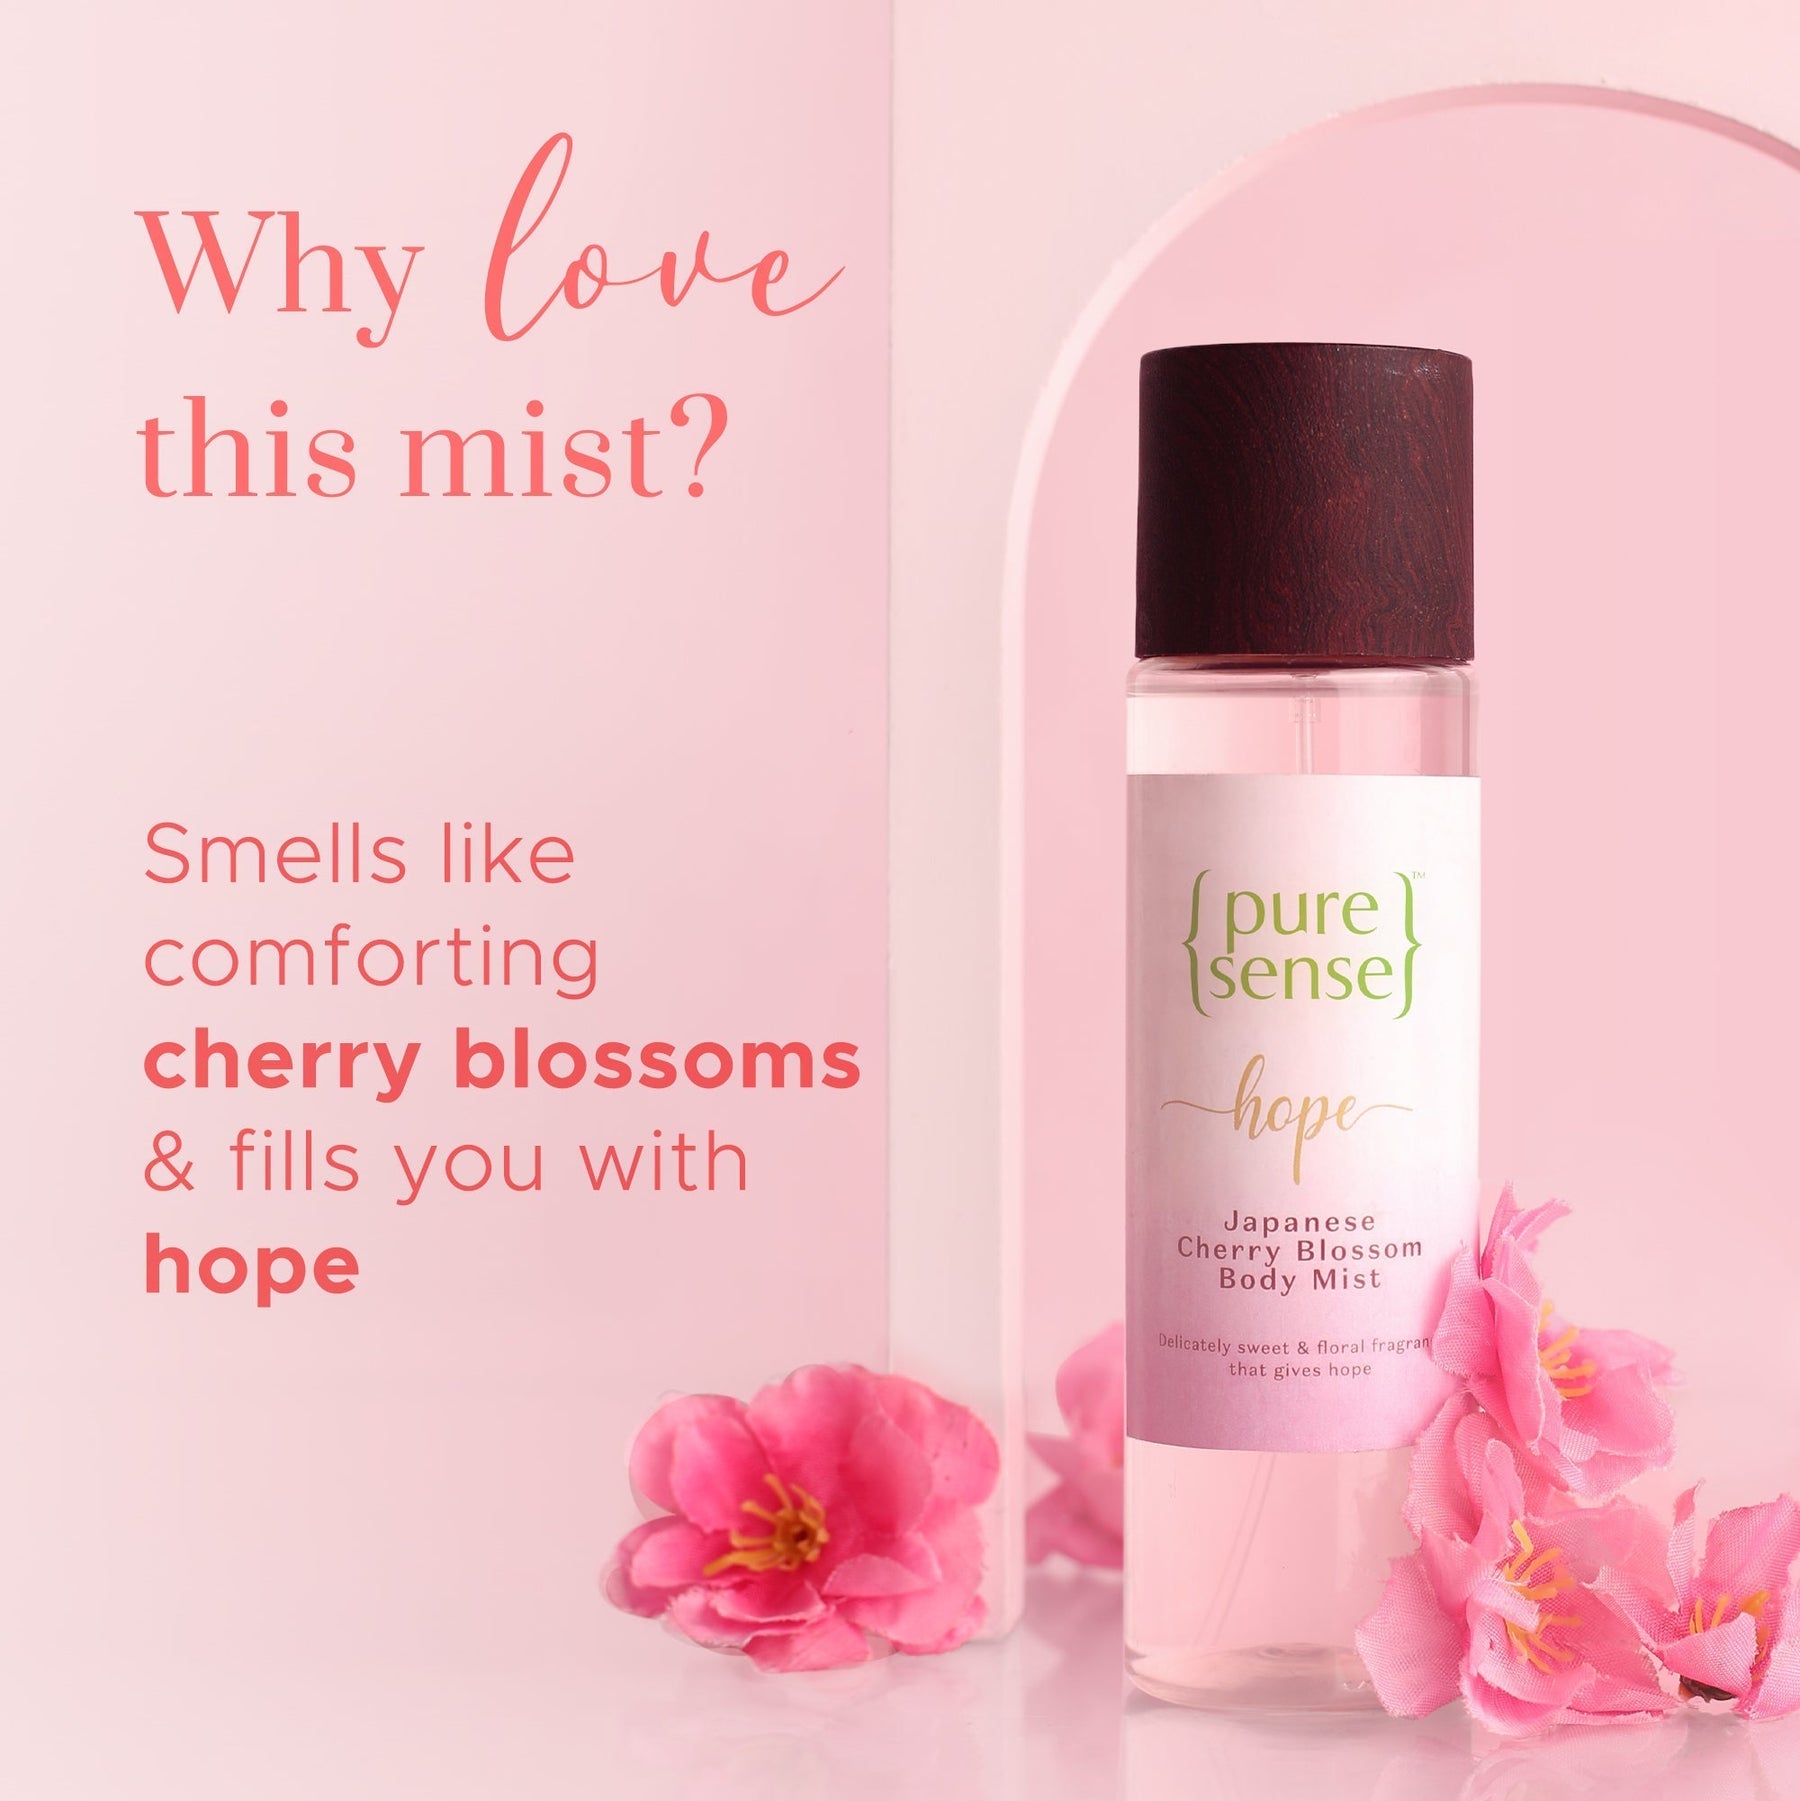 Hope Japanese Cherry Blossom Body Mist (Pack of 3) | From the makers of Parachute Advansed | 450ml